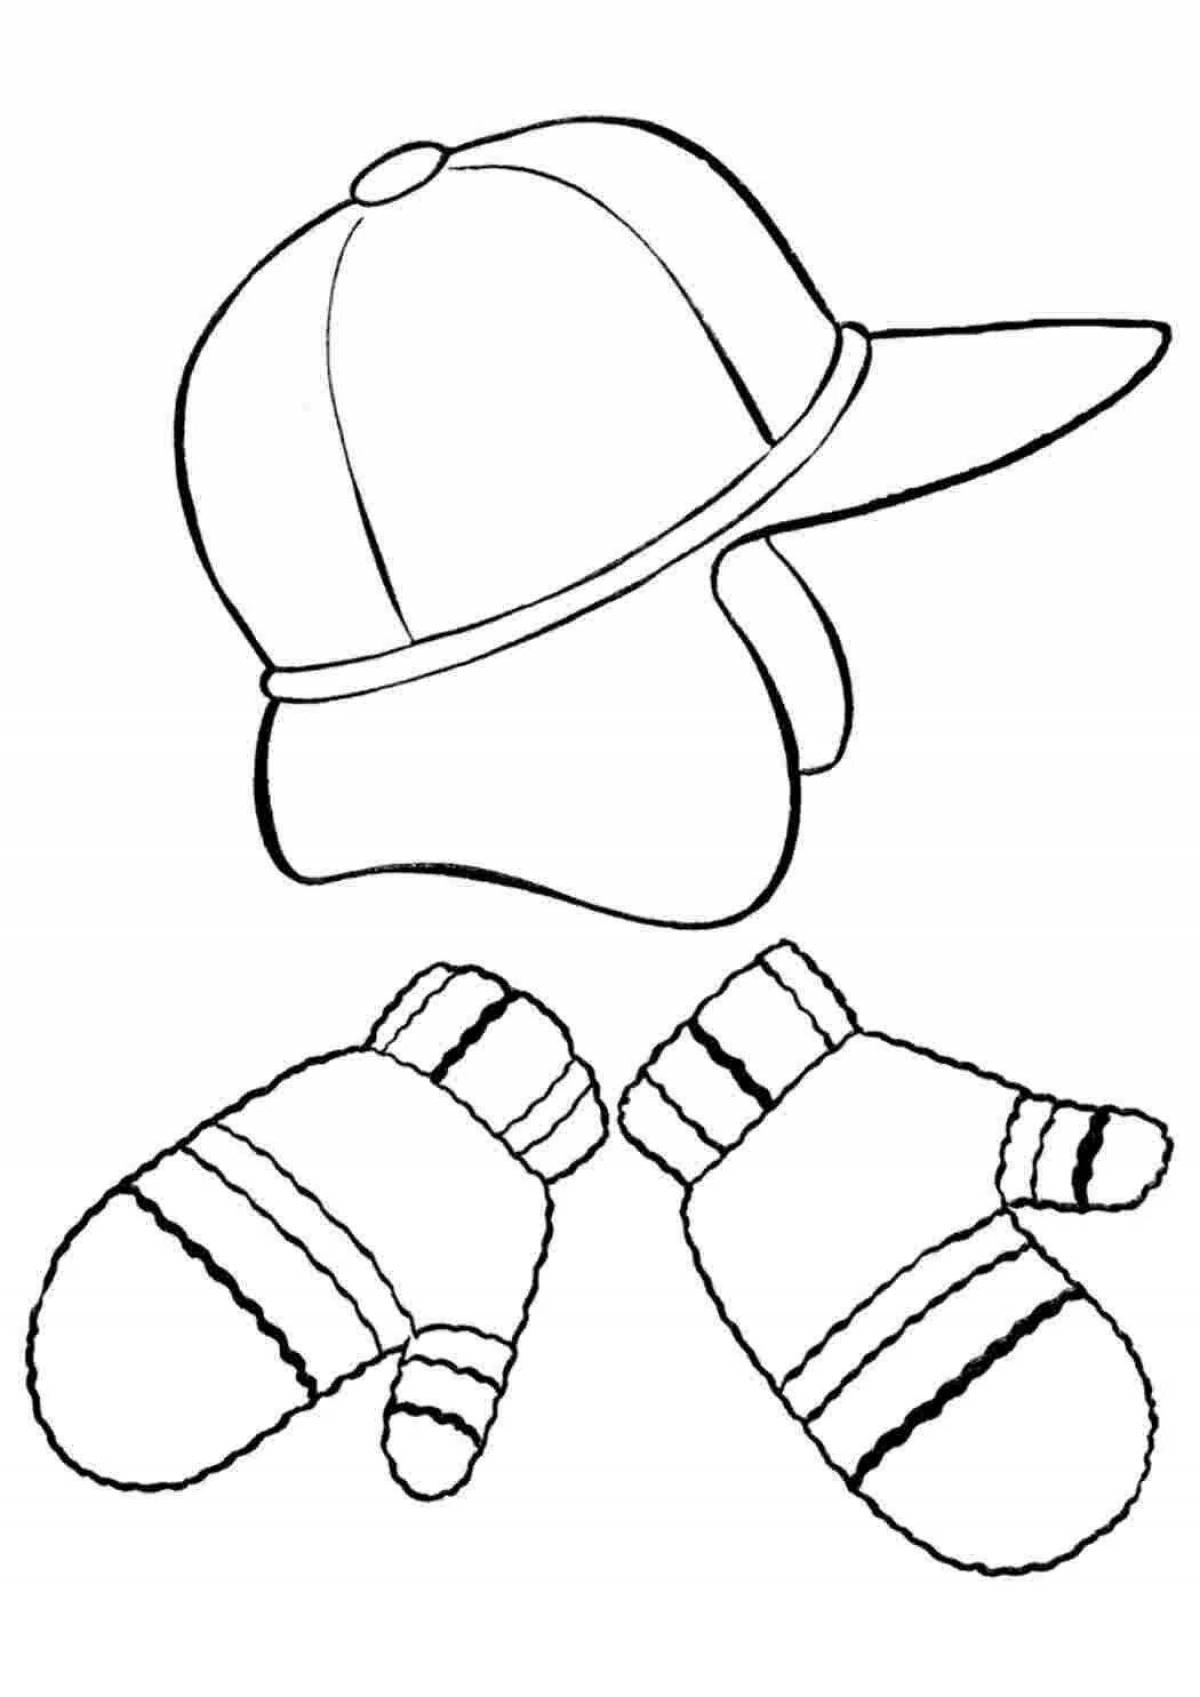 Coloring book shiny hat and gloves